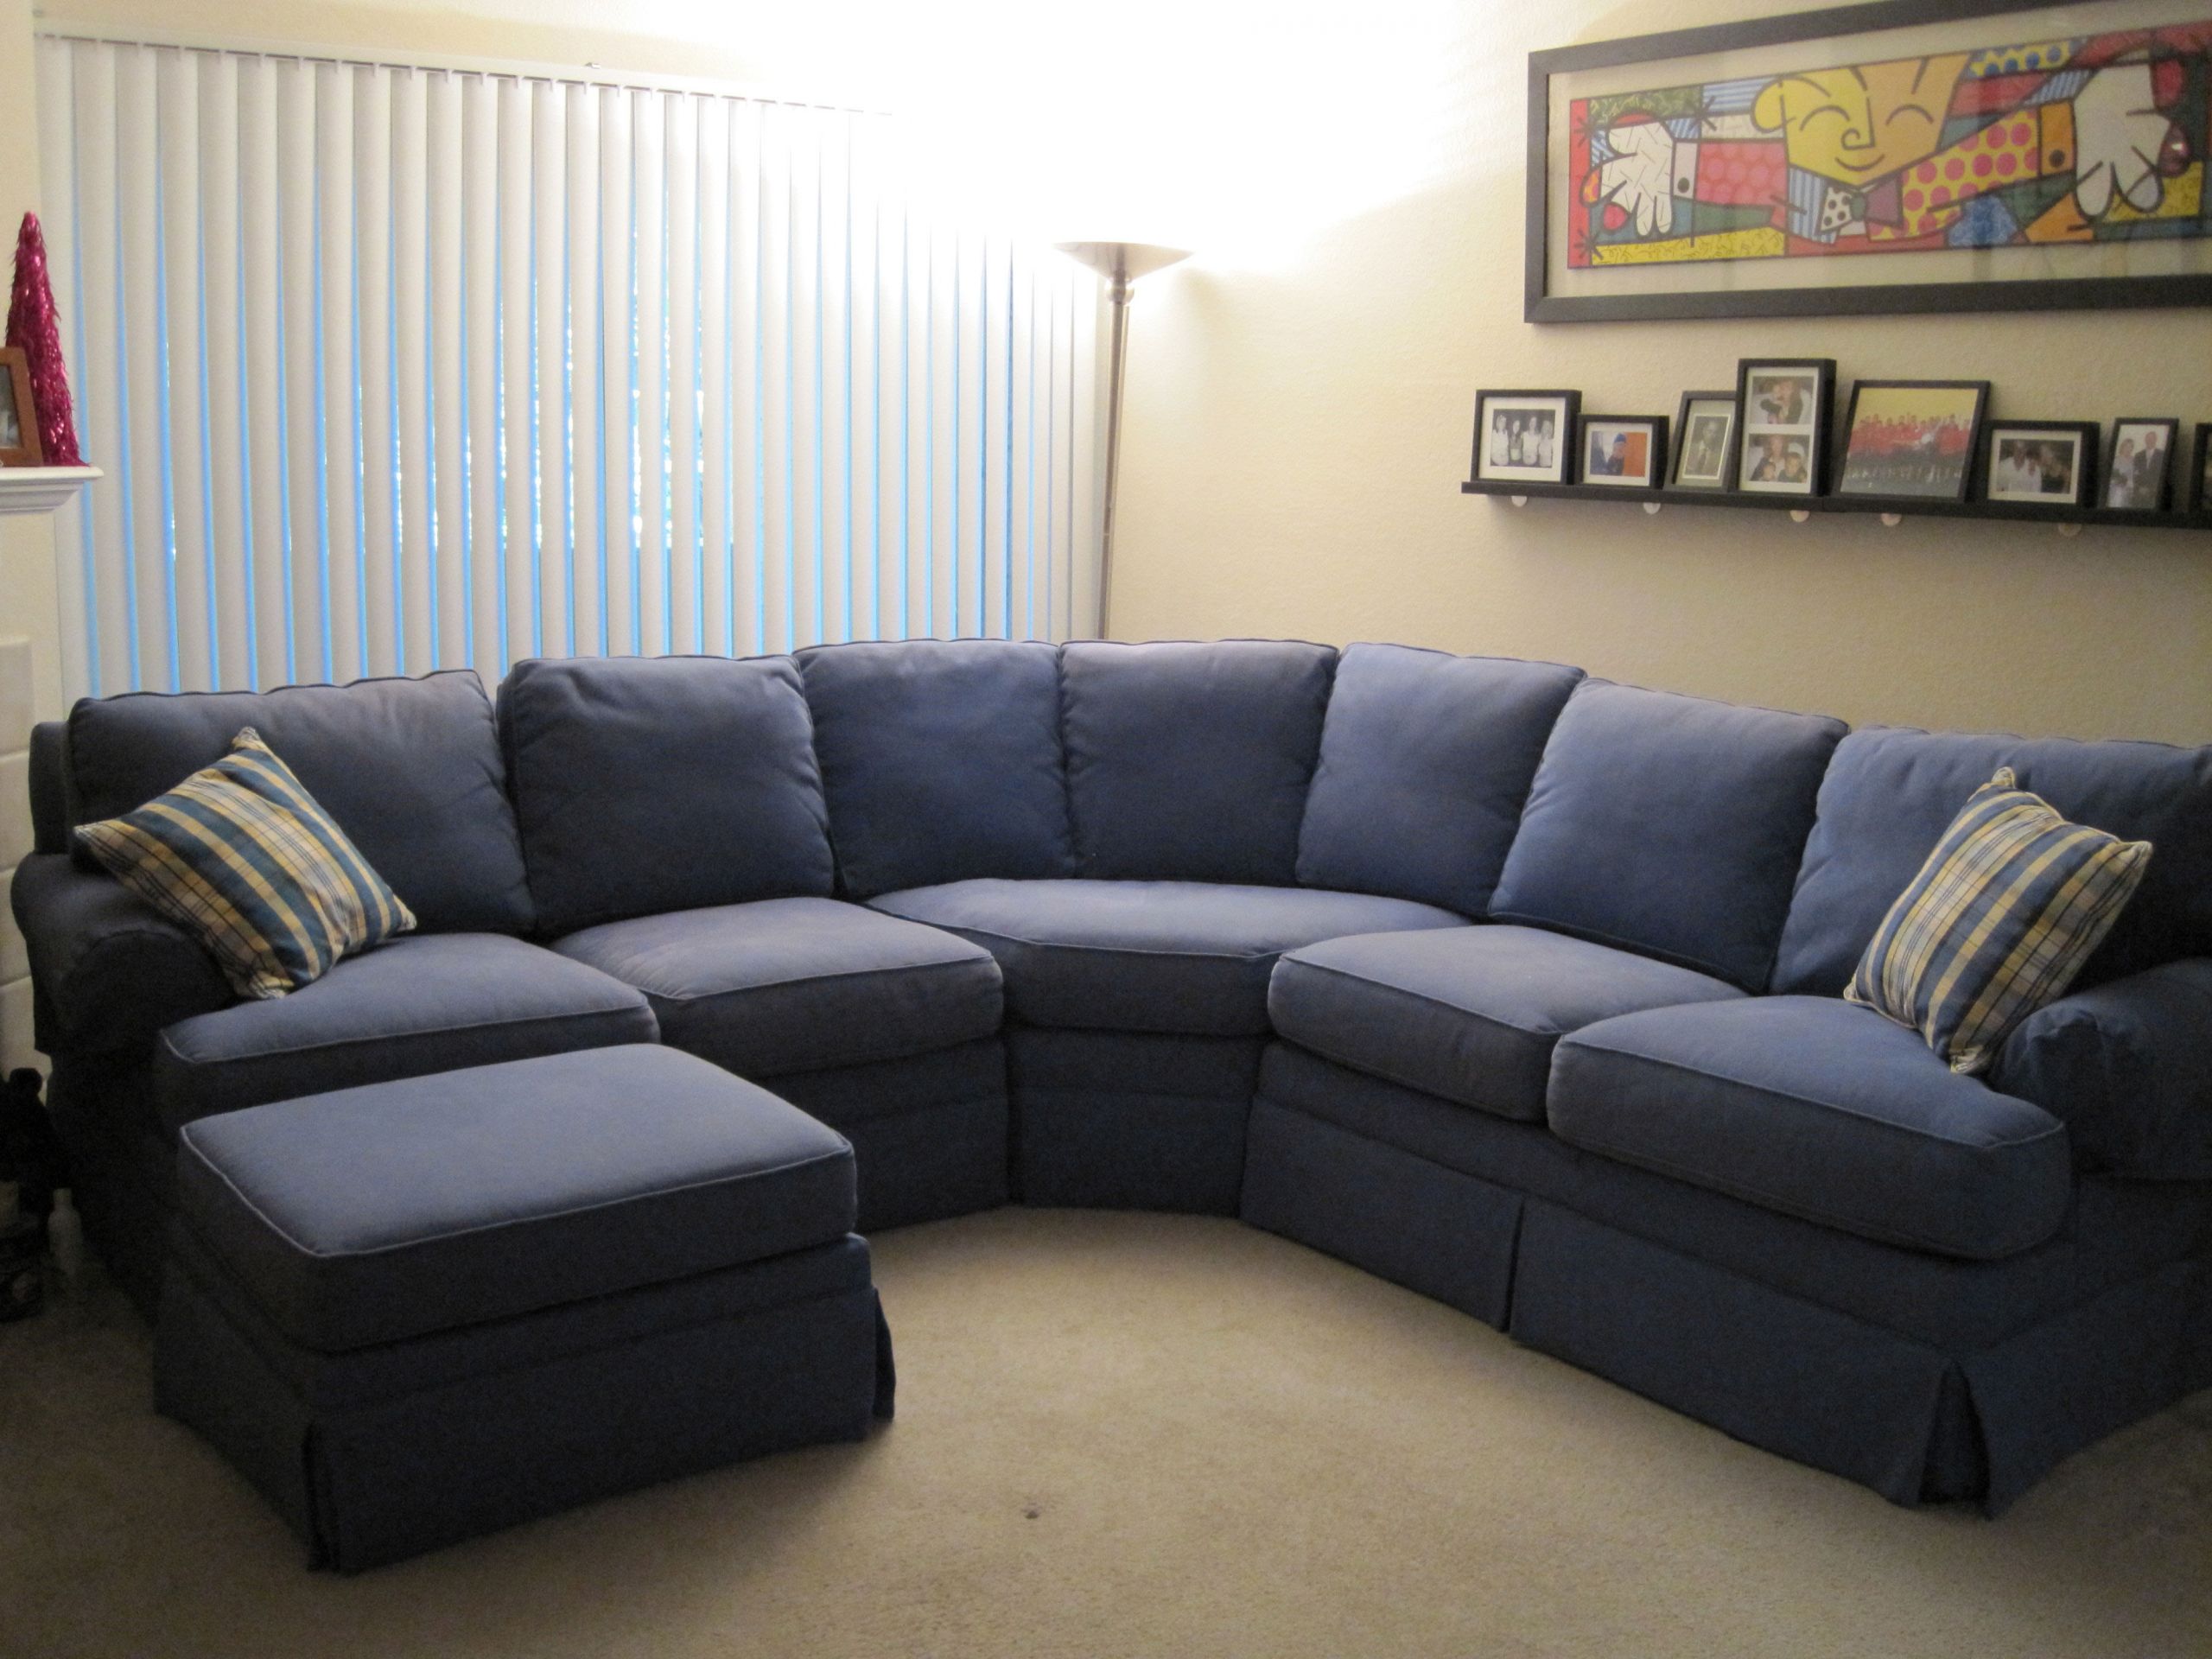 Sofa For Small Living Room
 Living Rooms with Sectionals Sofa for Small Living Room